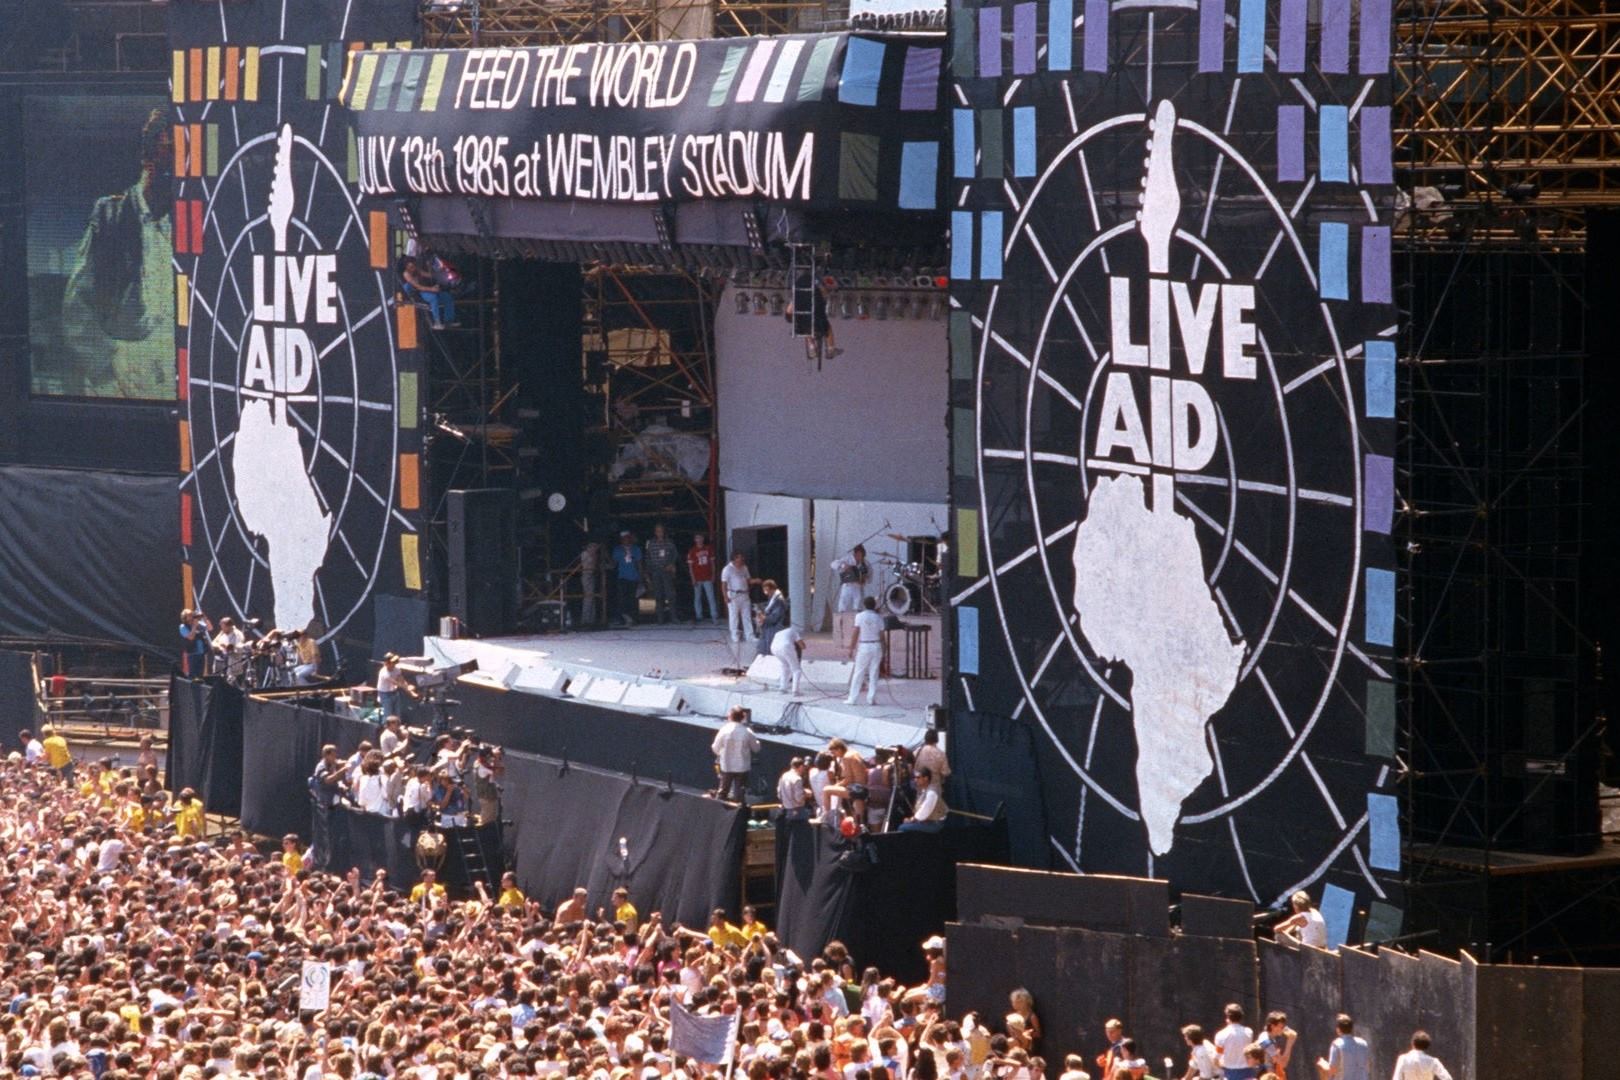 17-captivating-facts-about-live-aid